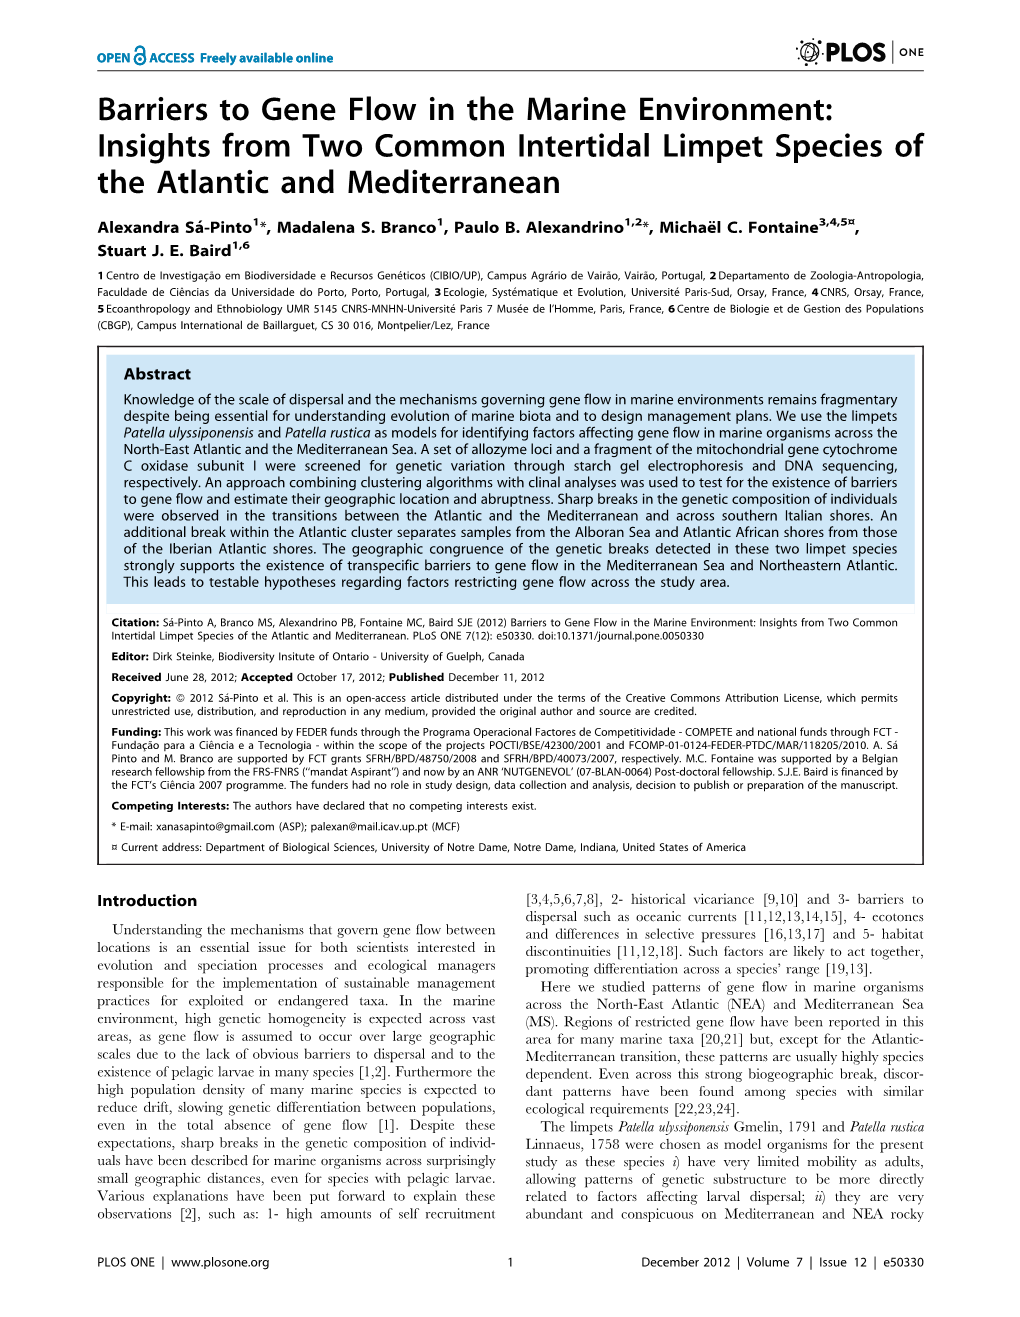 Barriers to Gene Flow in the Marine Environment: Insights from Two Common Intertidal Limpet Species of the Atlantic and Mediterranean